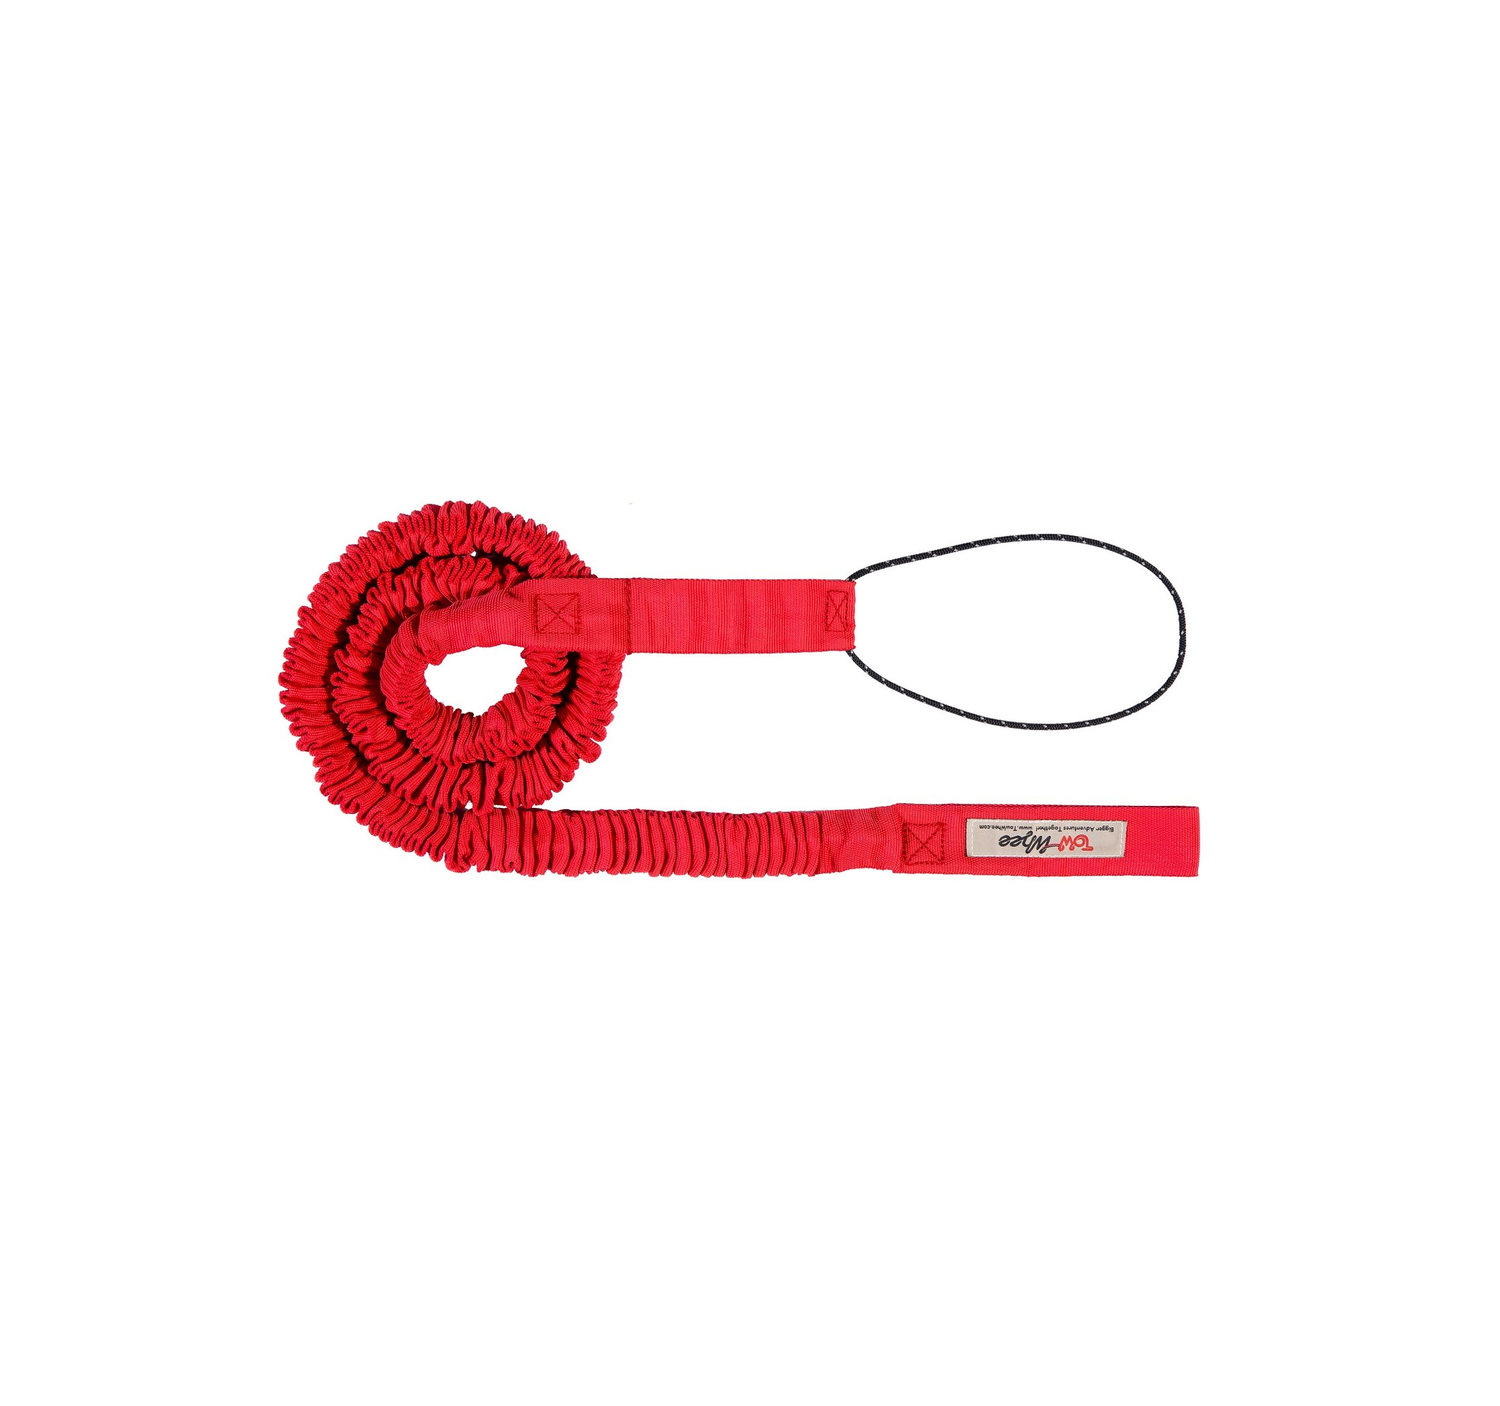 MoTowWhee Motorcycle Dirt Bike & Ebike Electronic Bicycle Bungee Cord Tow  Strap — TowWhee - Bungee Tow Strap Bike Trailer and More!